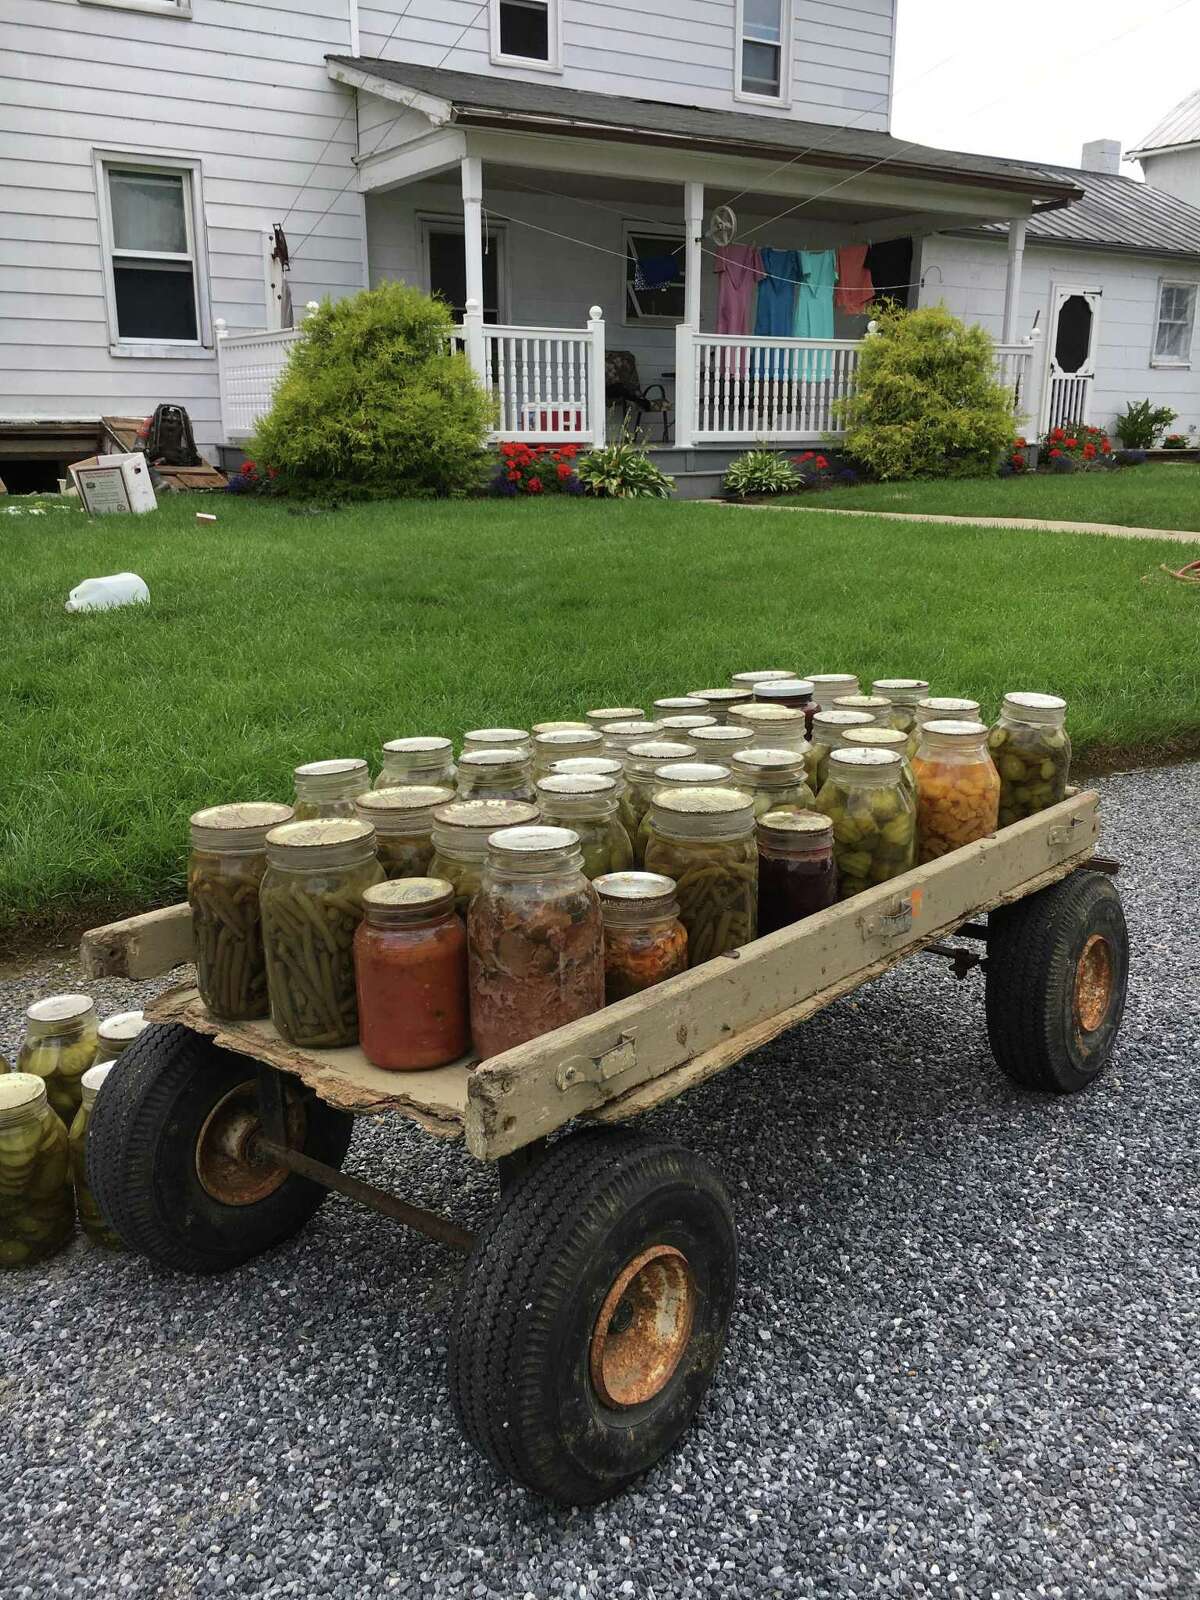 A wagon full of homemade jams and pickles is ready to sell at the farmer's market or farm stand.